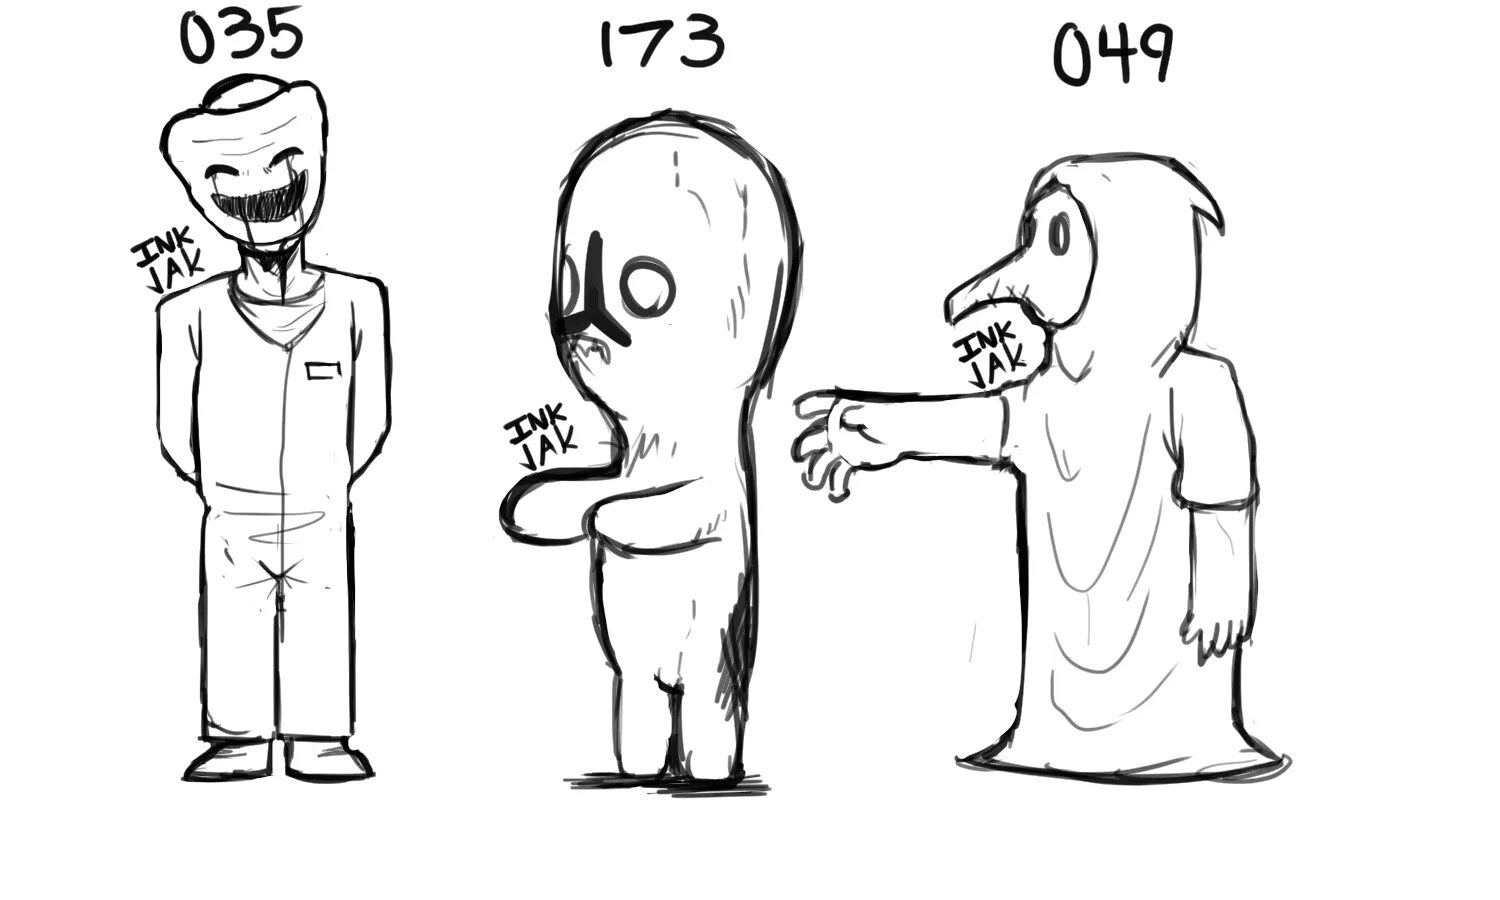 096 scp #12